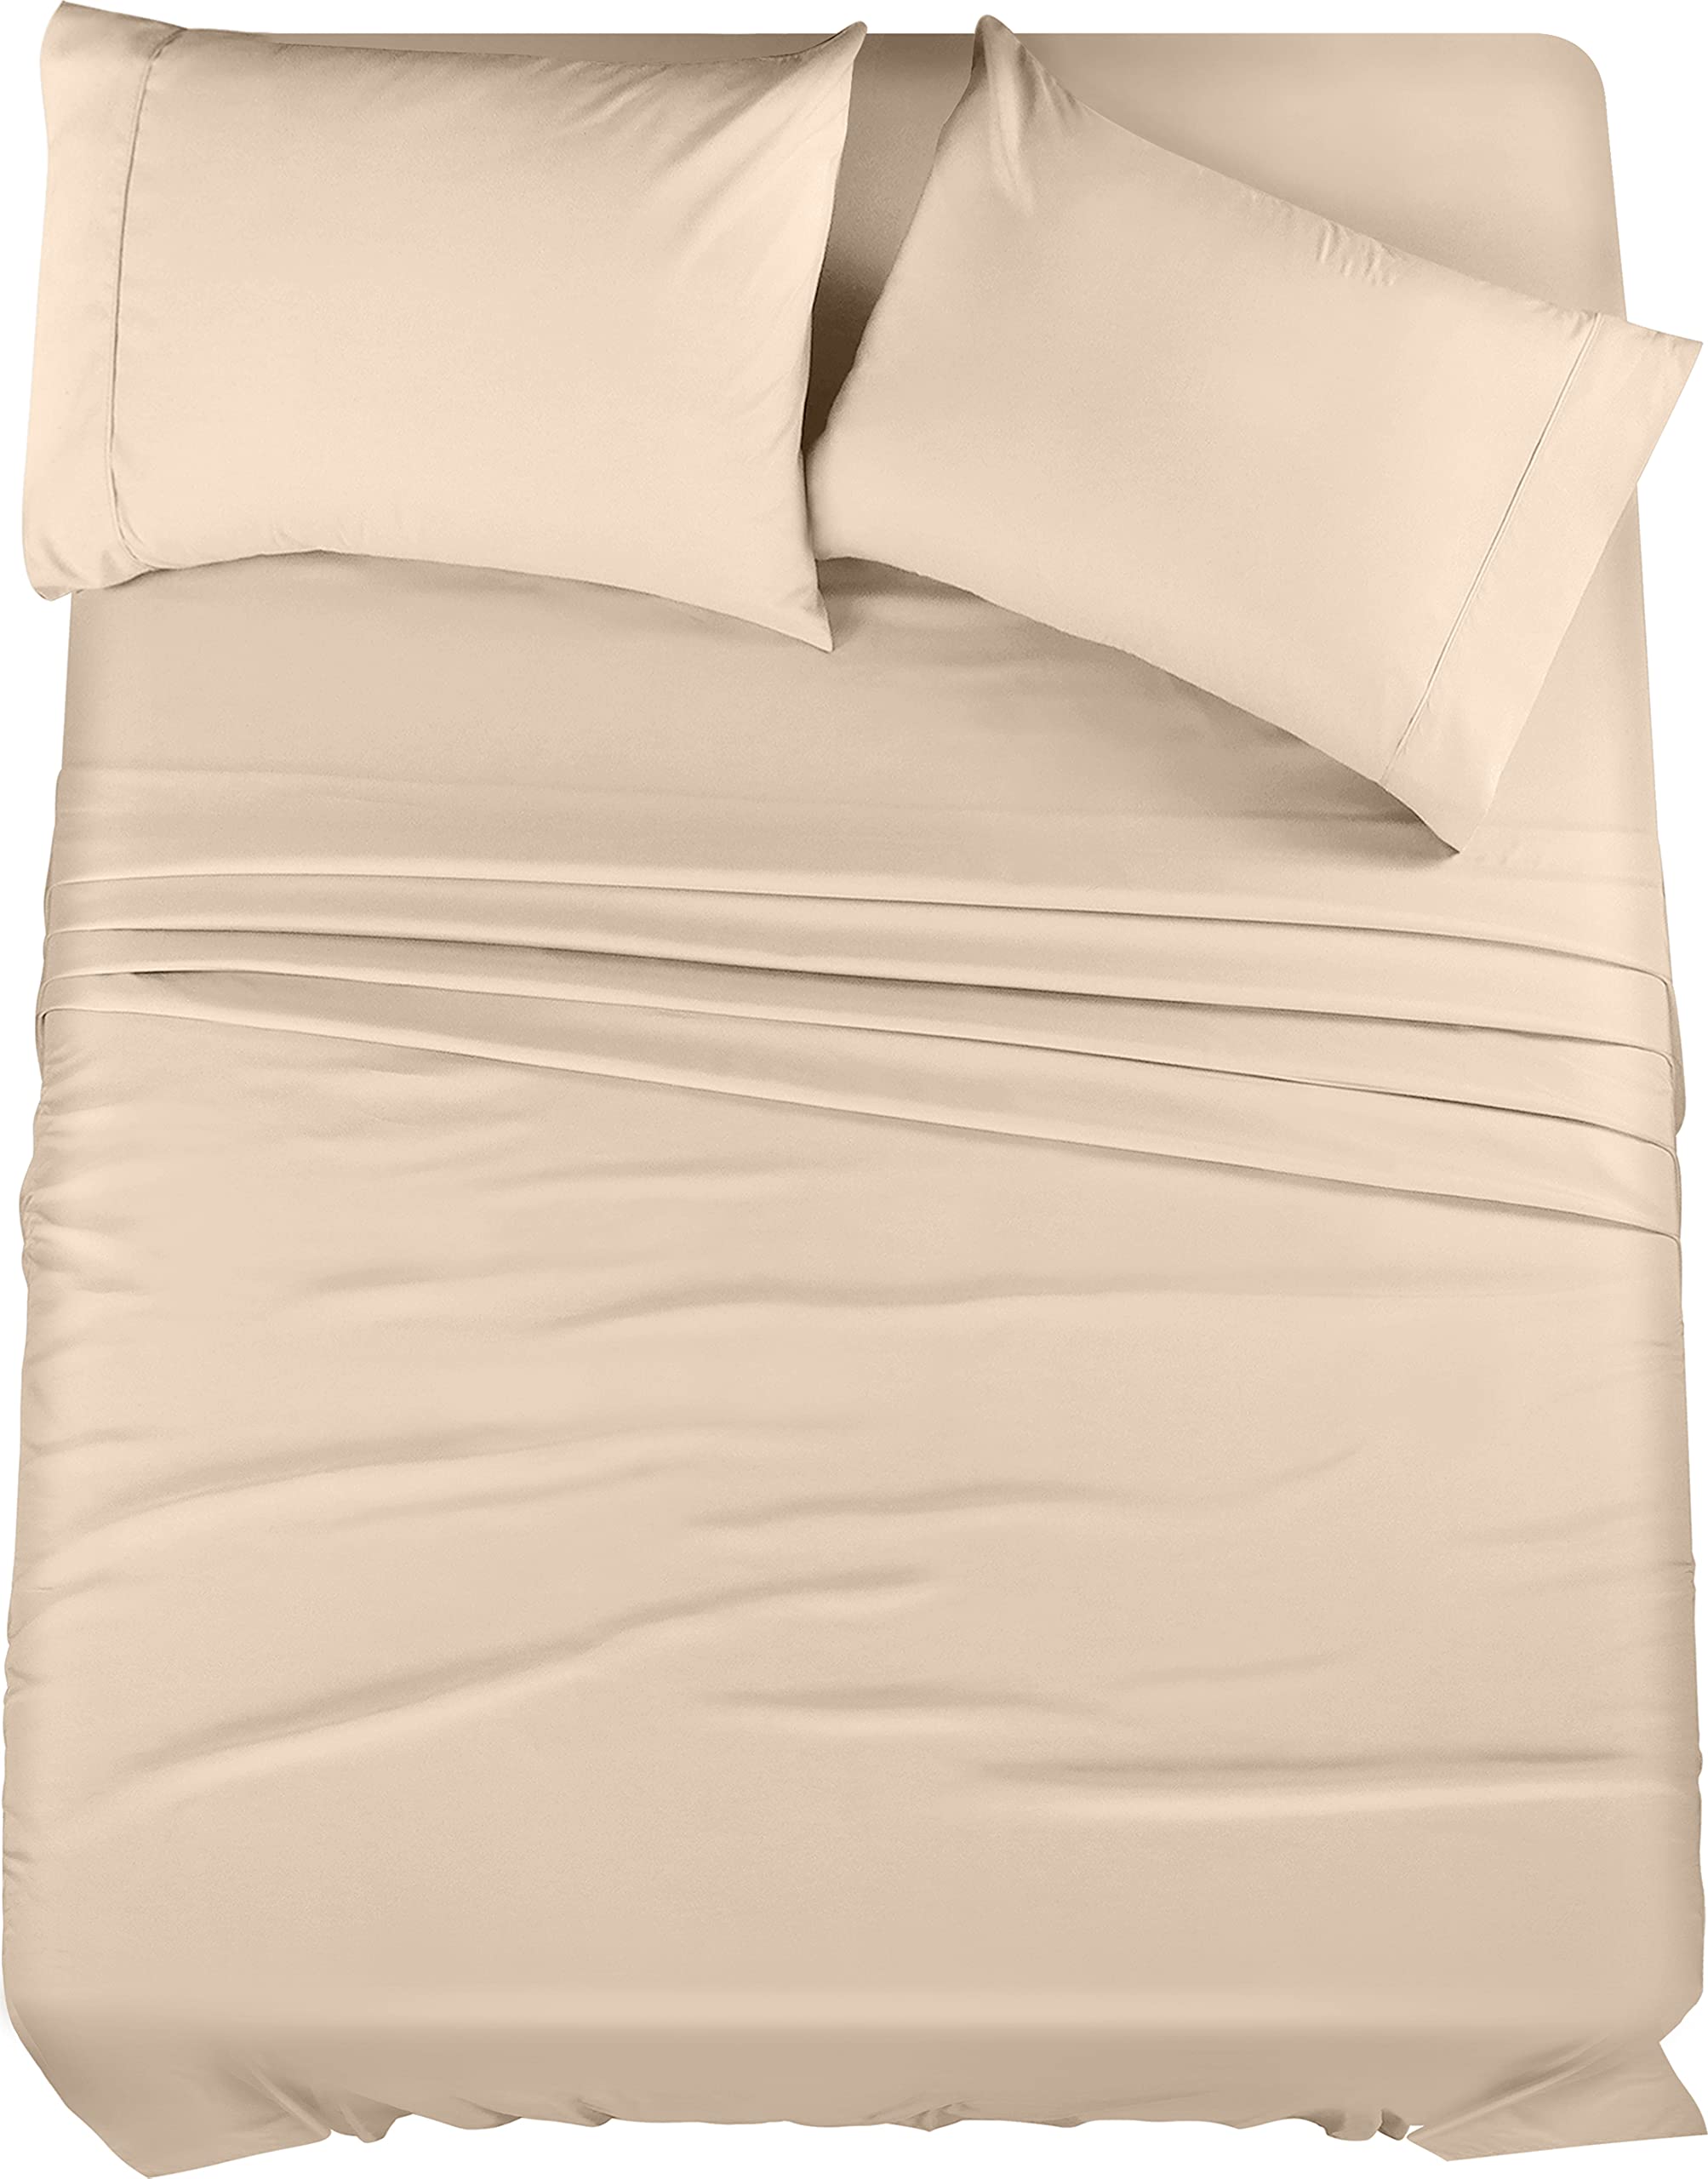 Book Cover Utopia Bedding California King Bed Sheets Set - 4 Piece Bedding - Brushed Microfiber - Shrinkage and Fade Resistant - Easy Care (California King, Beige) California King Beige